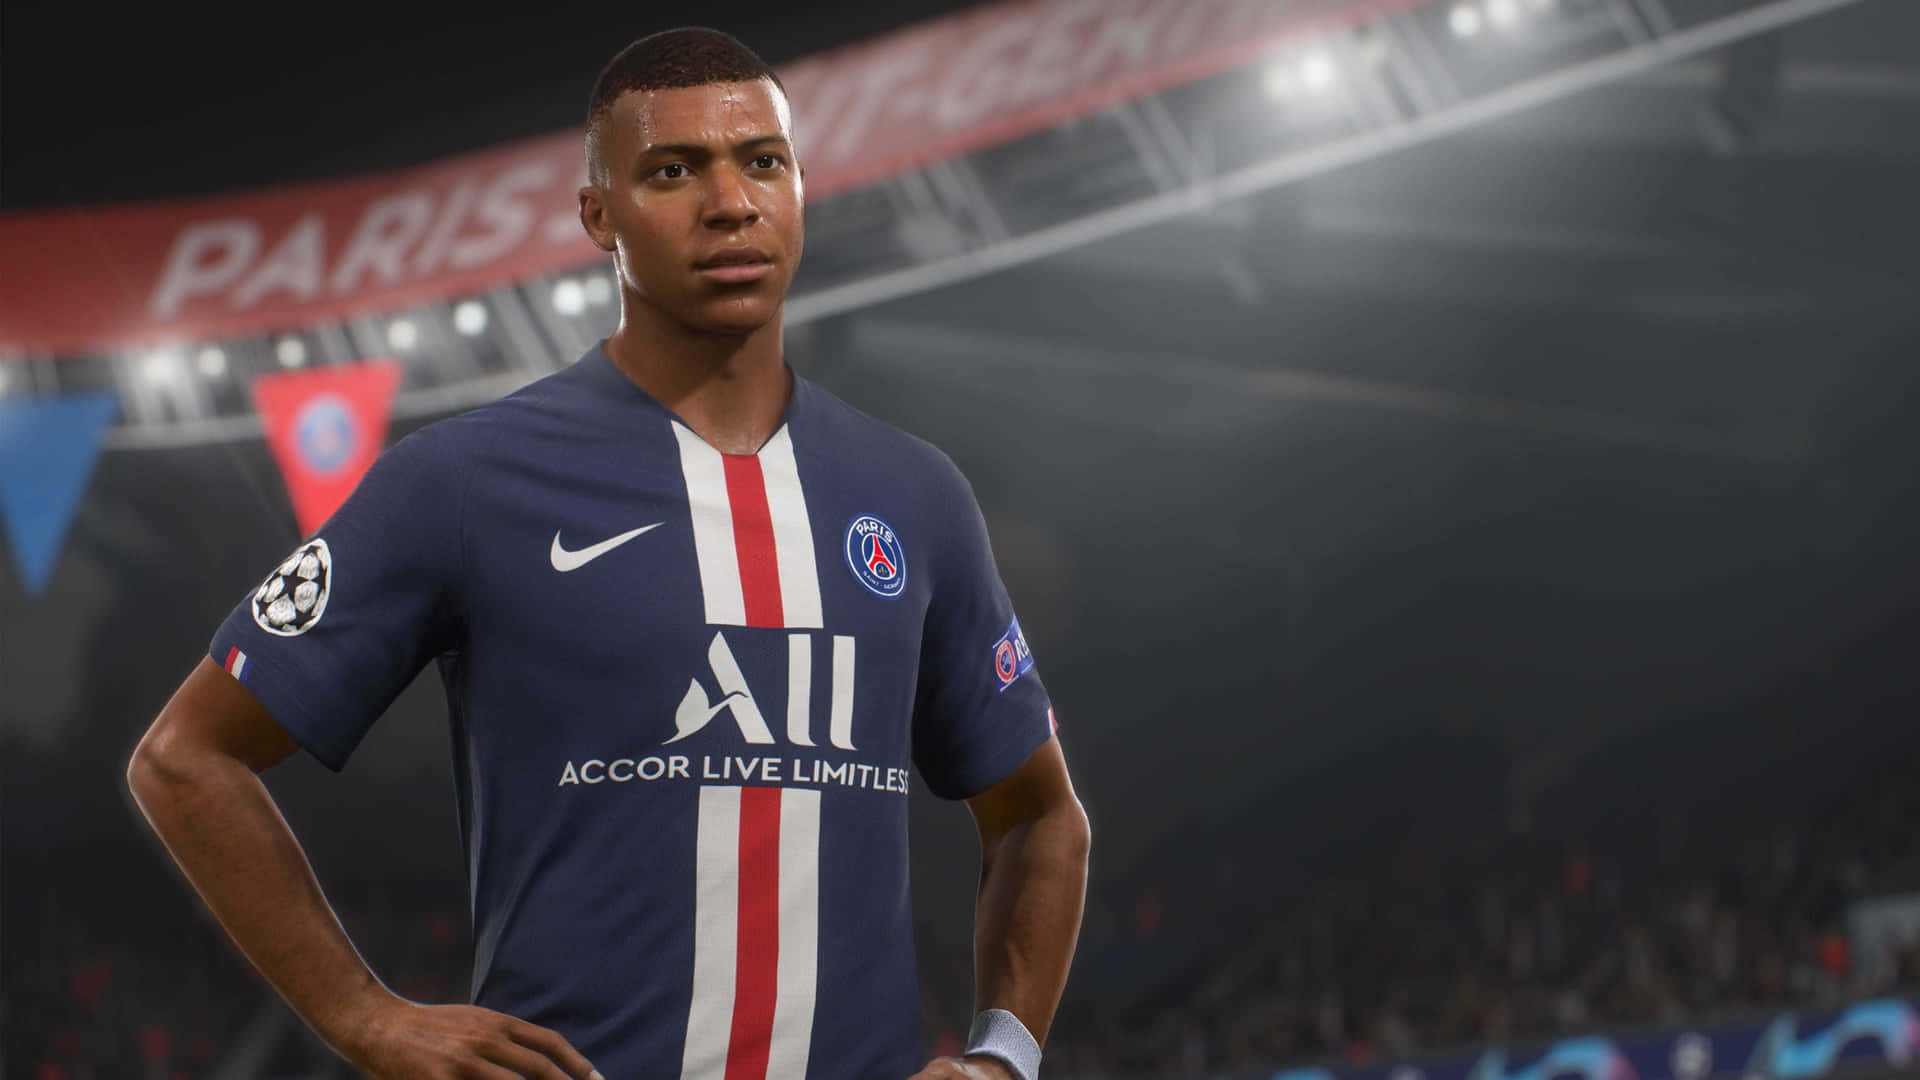 In FIFA 21 you can expect enhanced movement, communication and intensity for an unparalleled football experience.